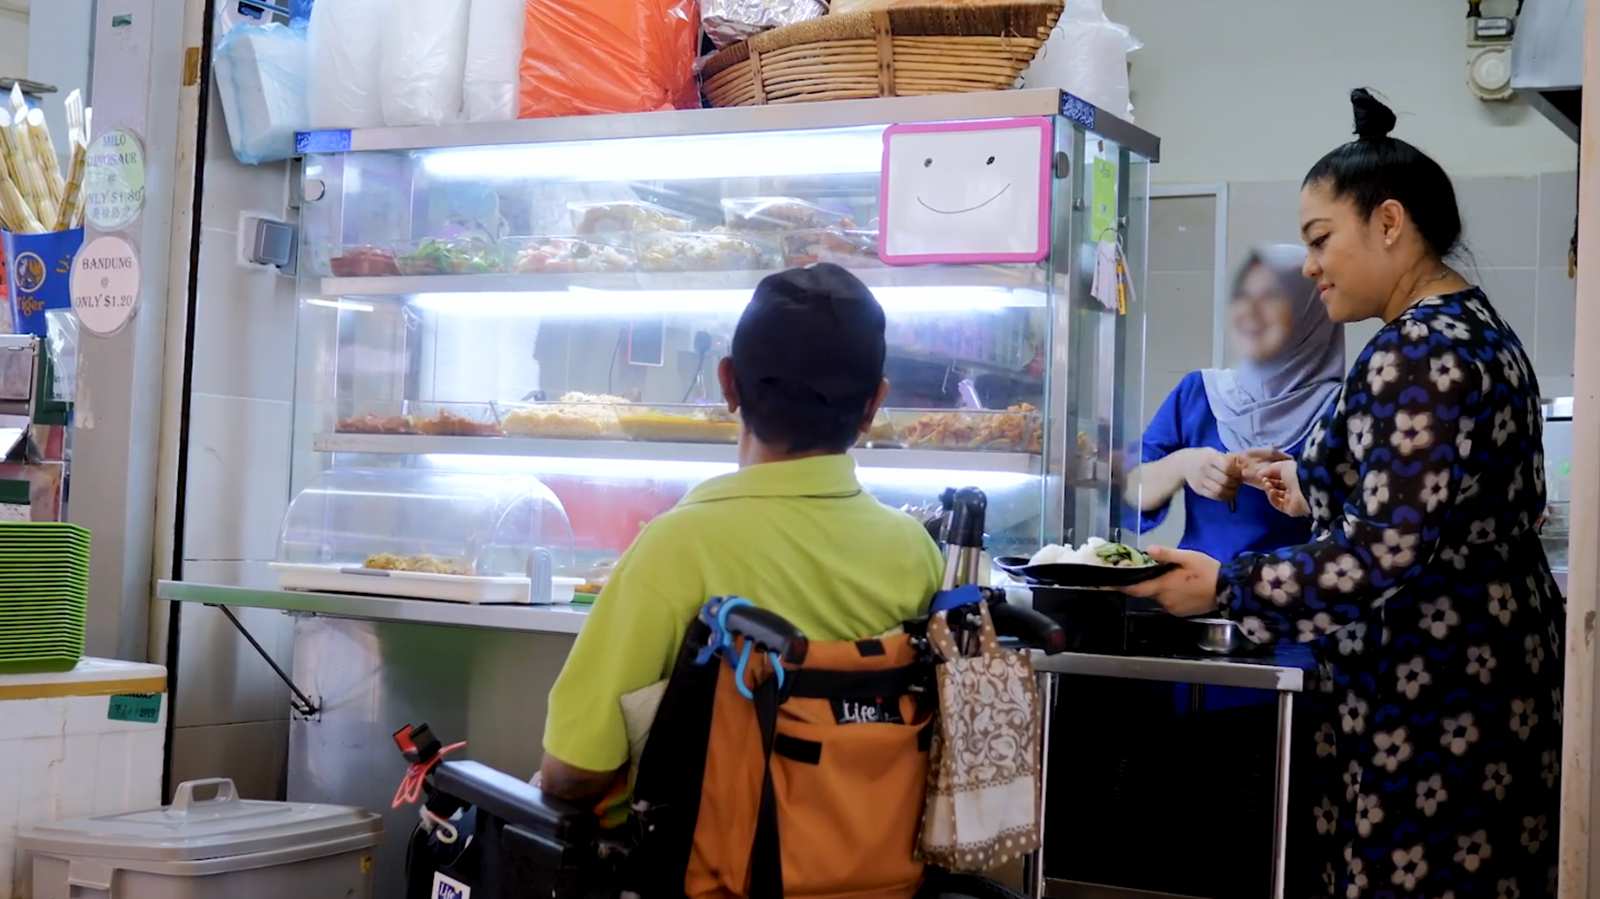 Tiong Bahru hawker stall invites Singaporeans to chope “bad day meals” to feed the needy